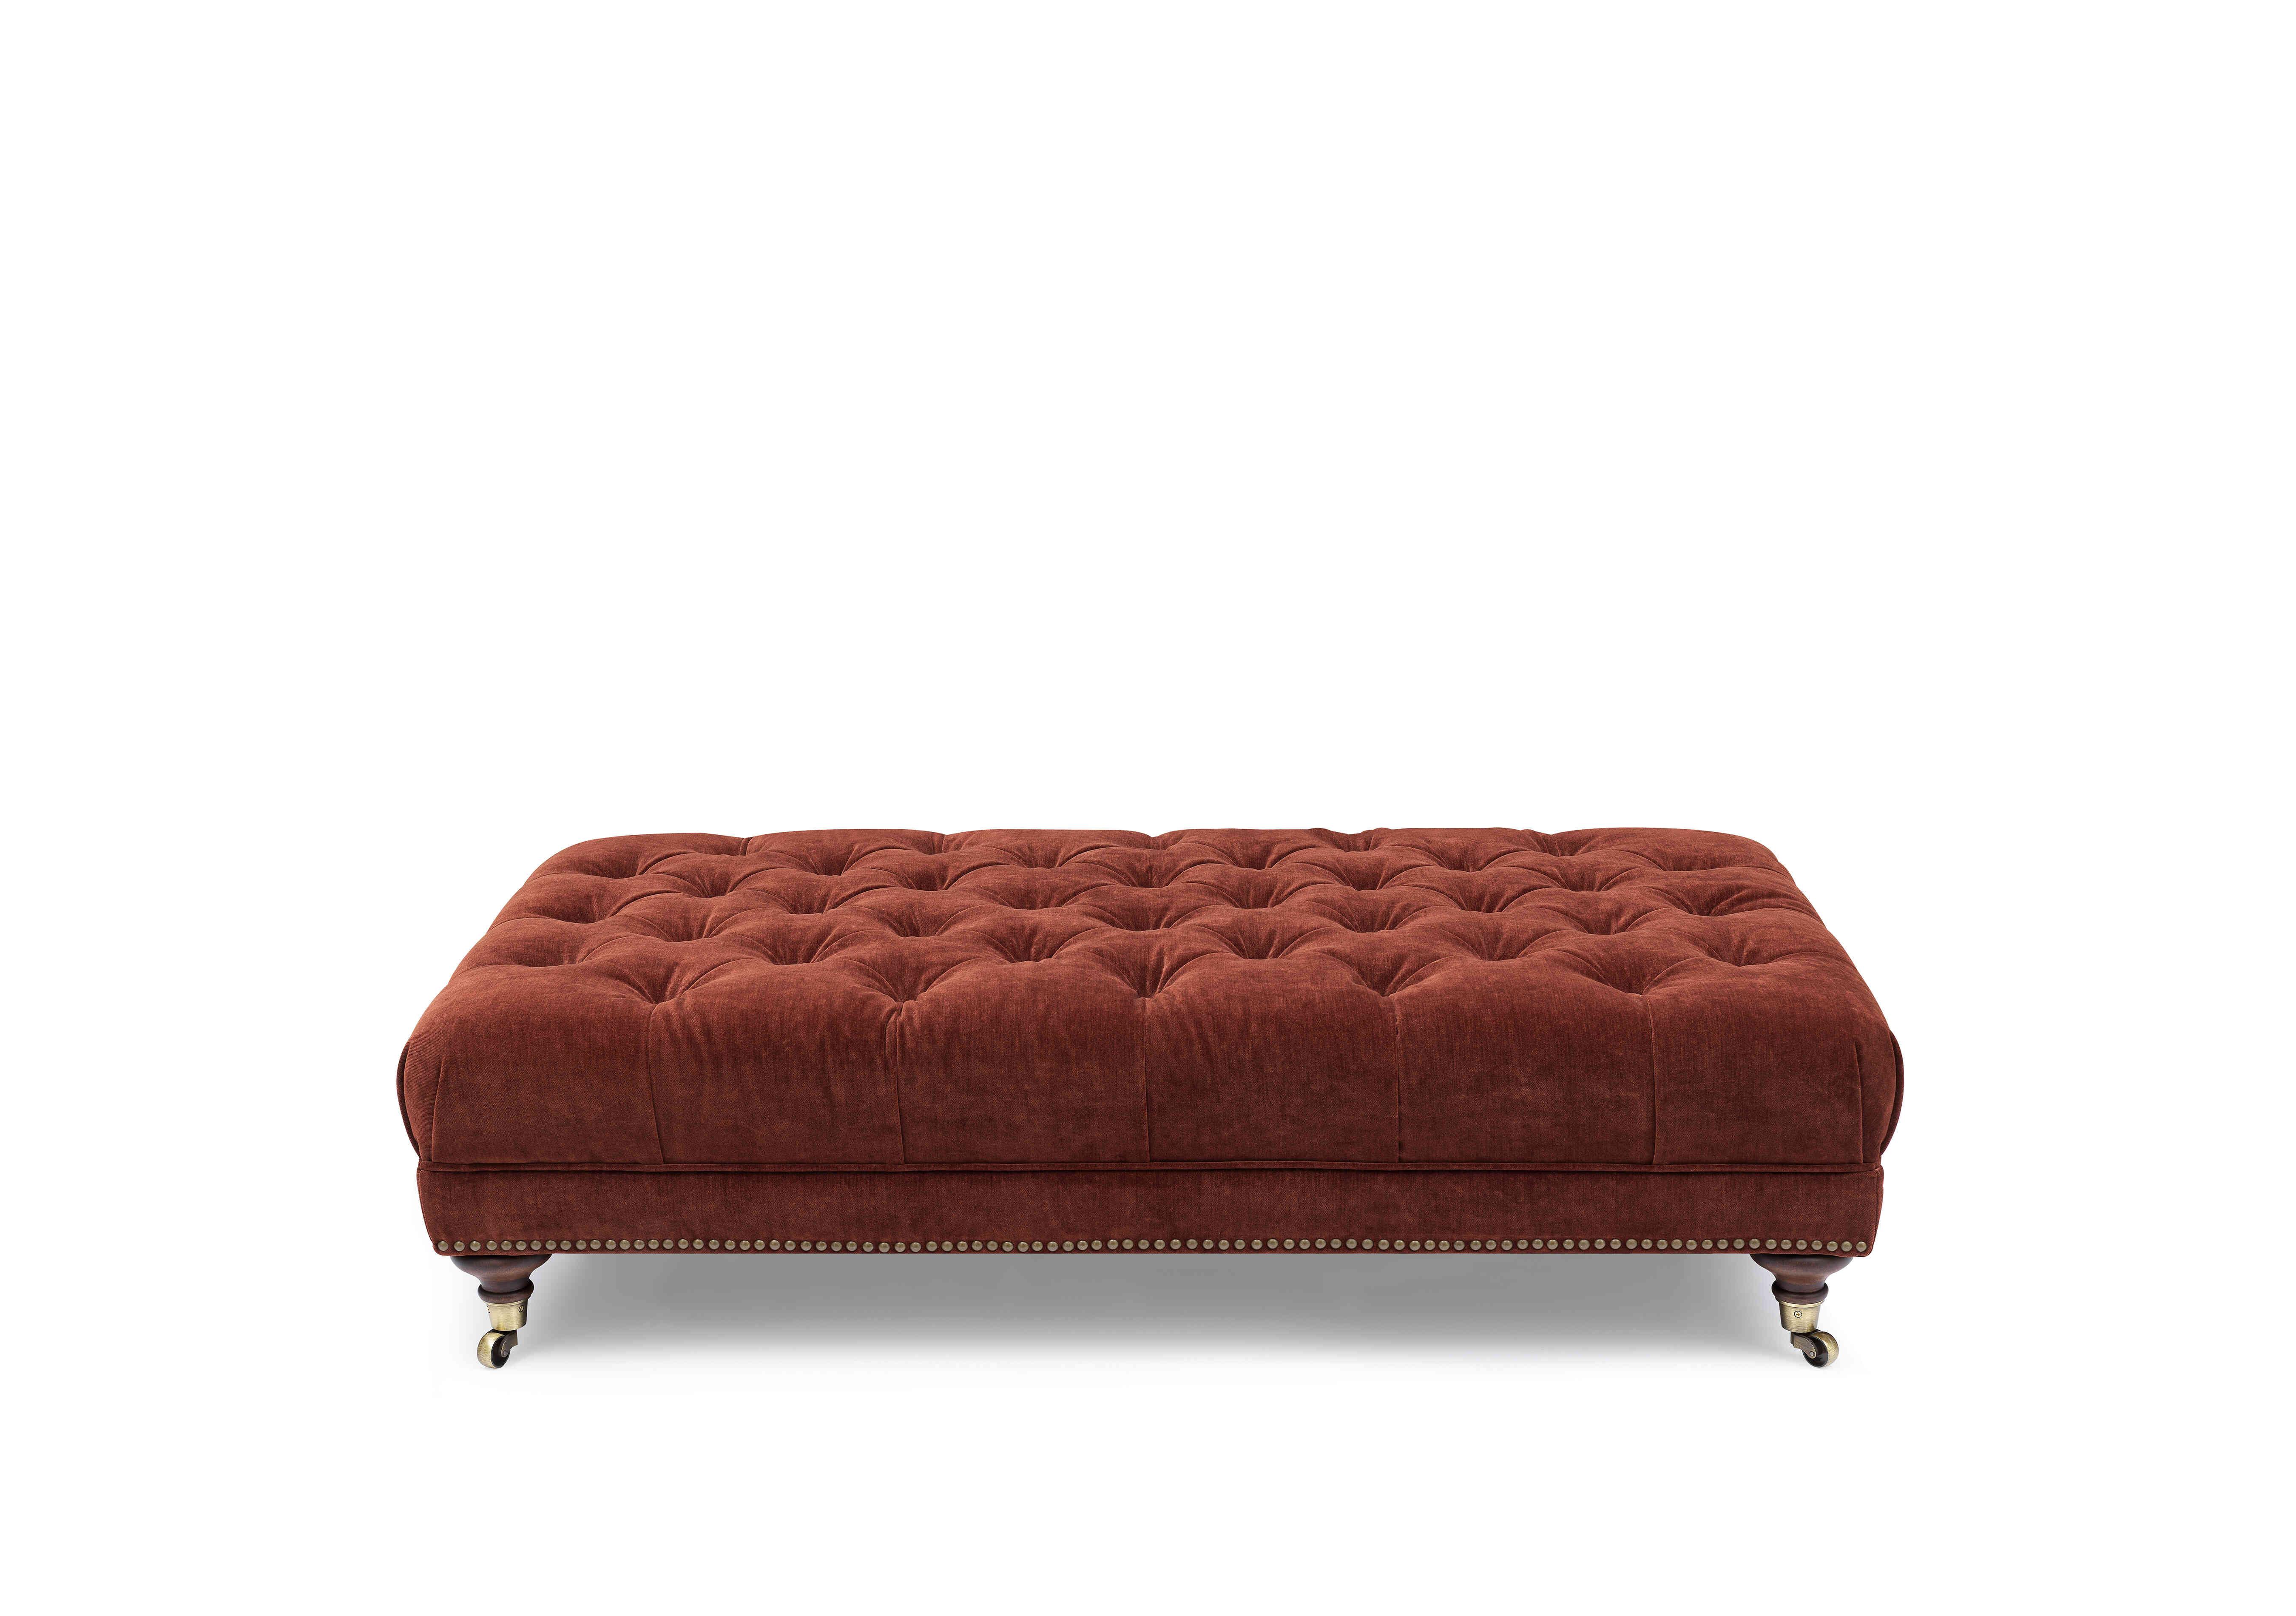 Wallace Fabric Rectangular Footstool with Castors in X3y1-W019 Tawny on Furniture Village